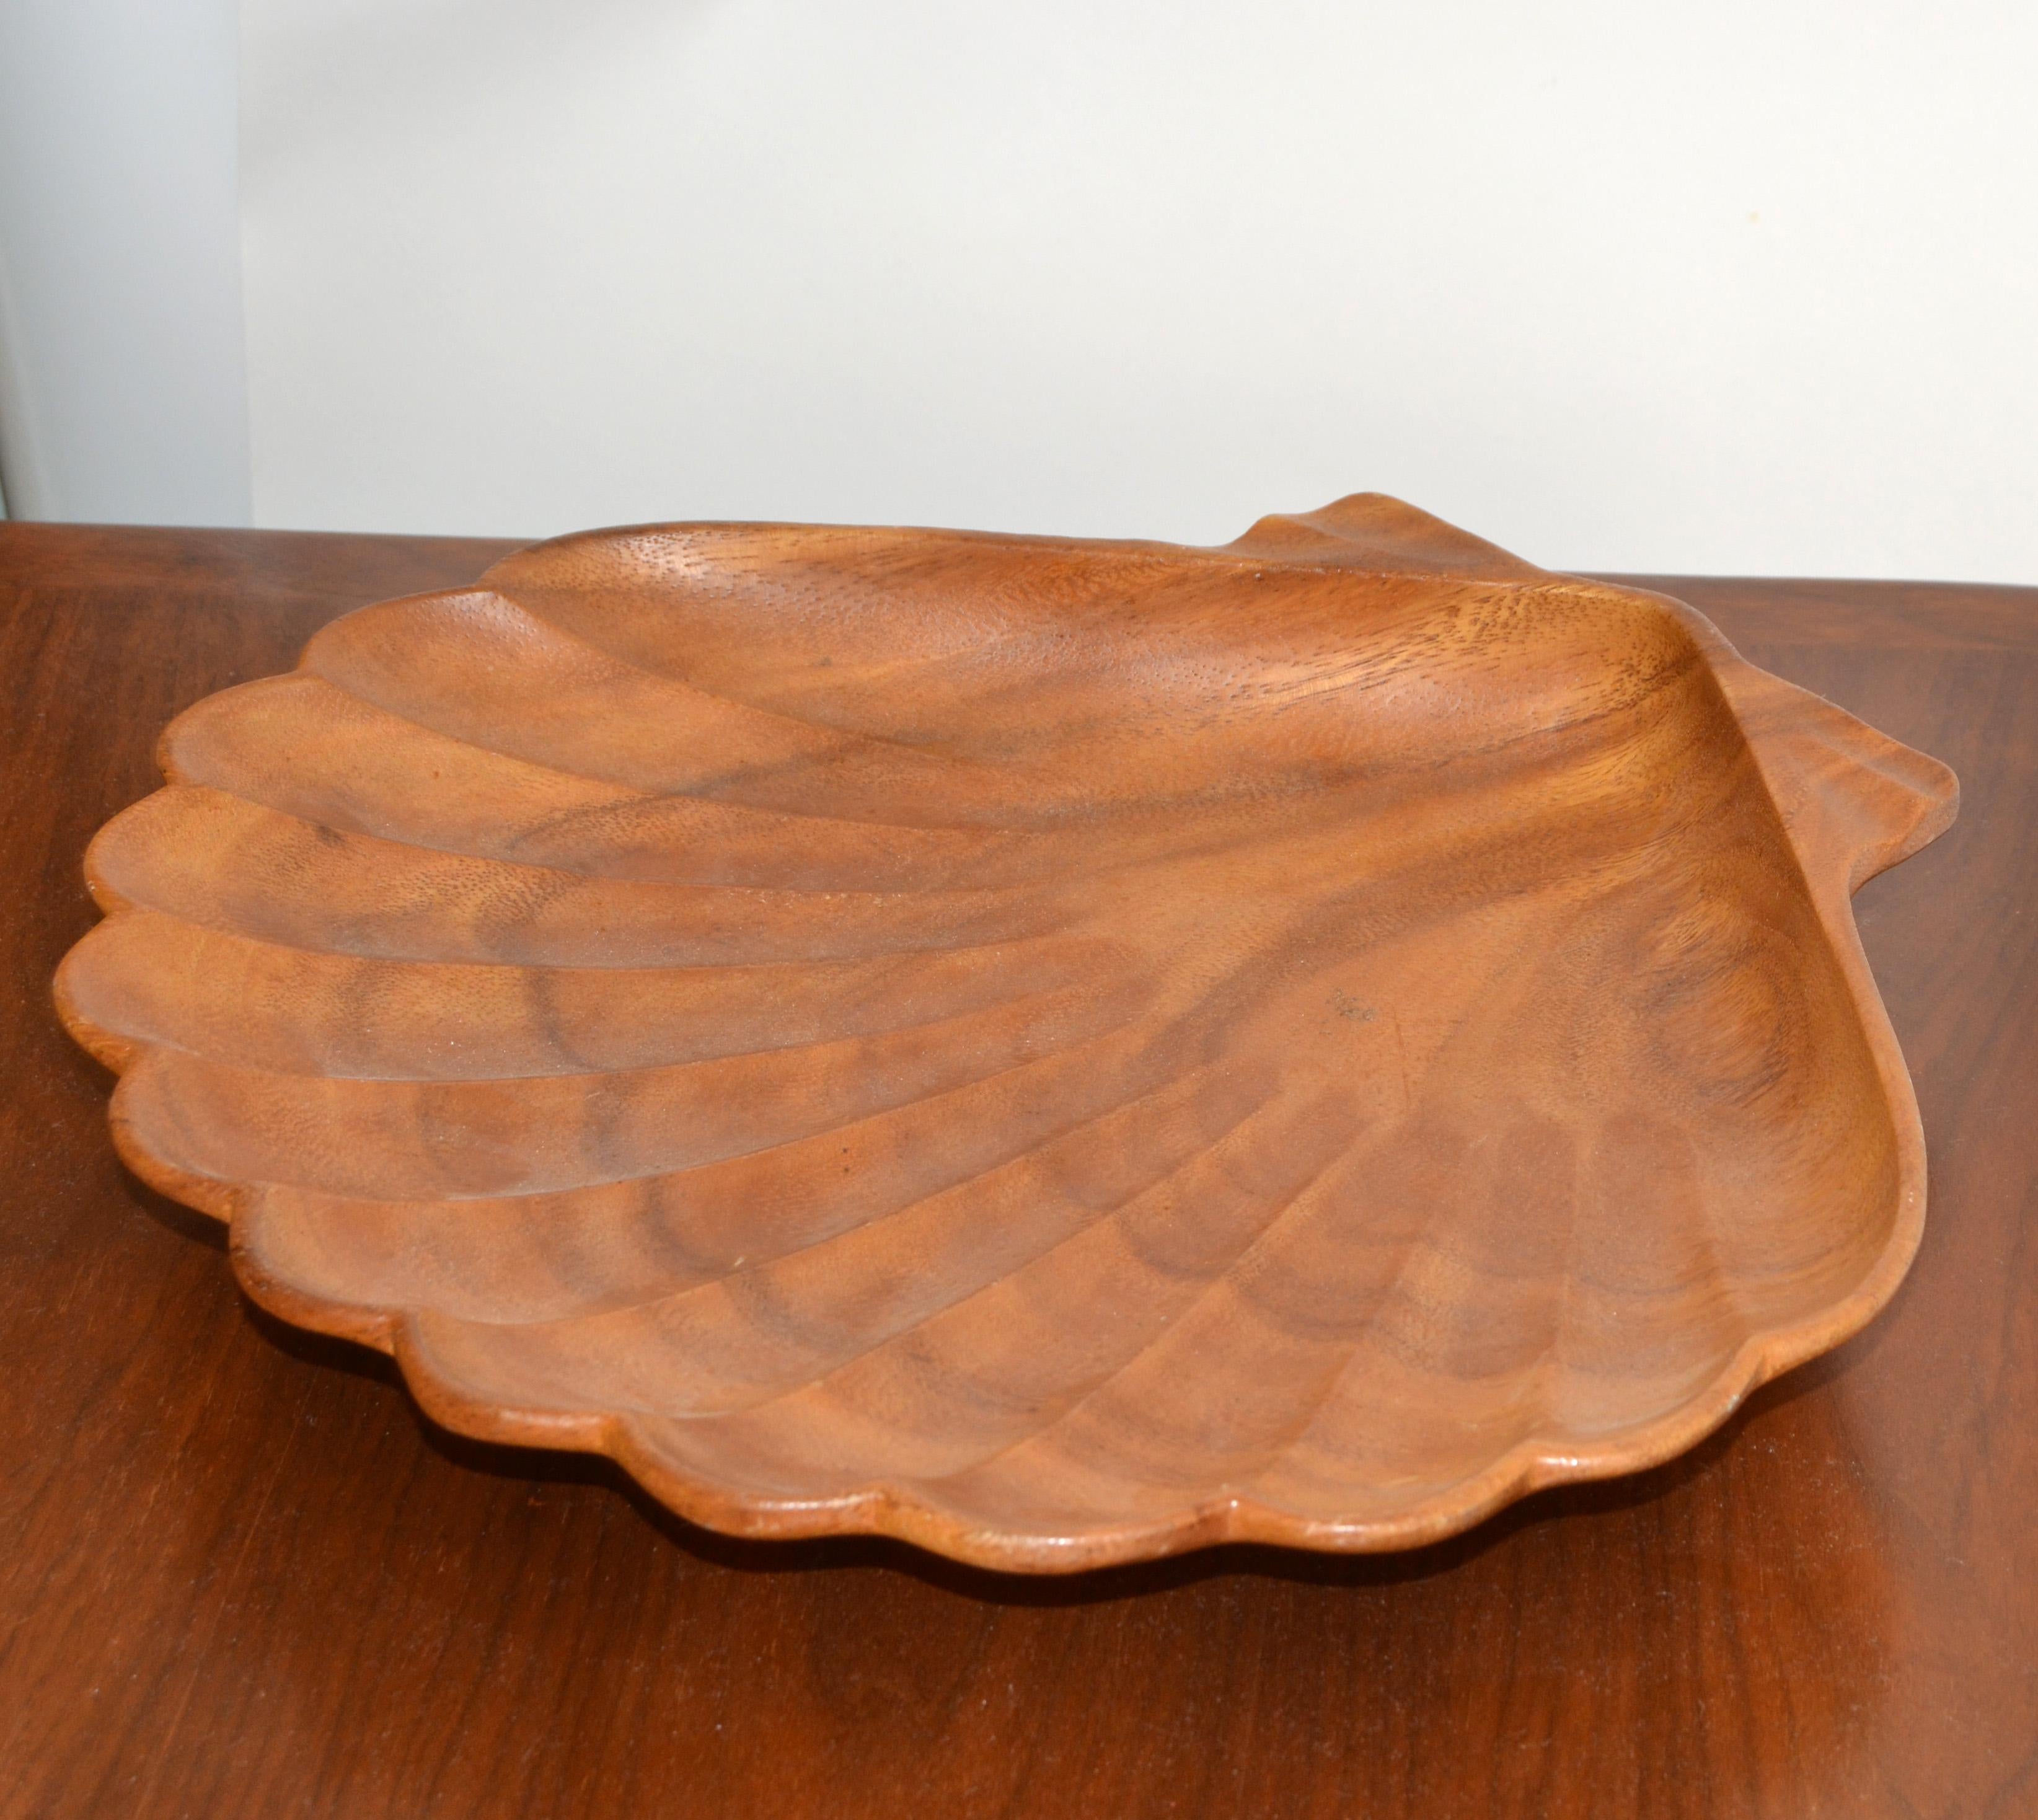 Nautical organic modern handmade clam shell serving platter, tray or decorative bowl made out of monkeypod wood.
Sculptural crafted by the Moore International, Honolulu, Haiti.
Brandmark at the bottom.
In good vintage condition with some wear to